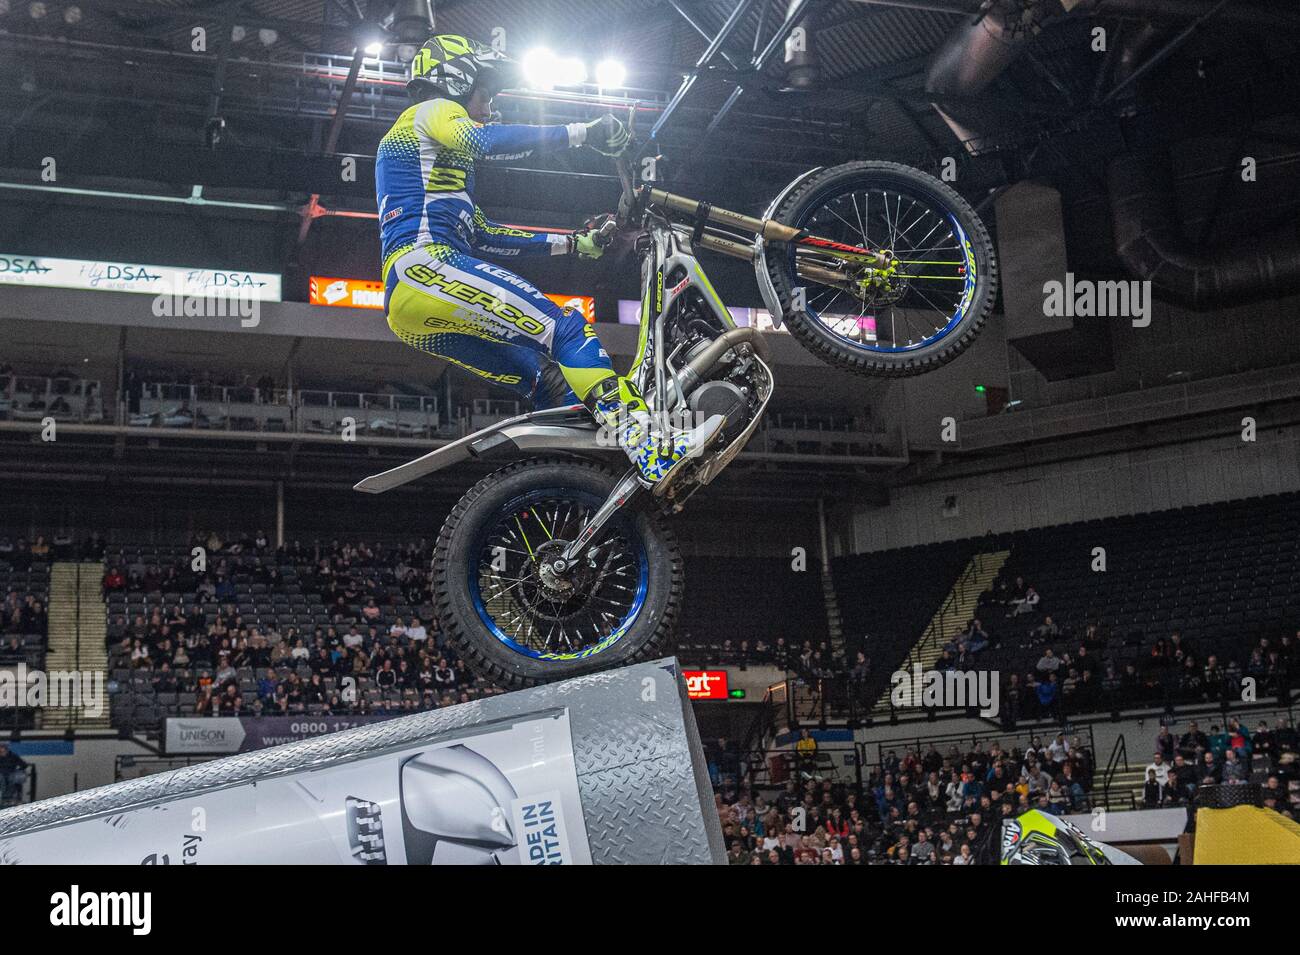 Sheffield, UK. 28th Dec, 2019. Sheffield, UK. Jeroni Fajardo, Spain (Sherco) on Section 3 during the 25th Anniversary Sheffield Indoor Trial at the FlyDSA Arena, Sheffield on Saturday 28th December 2019. (Credit: Ian Charles | MI News) Credit: MI News & Sport /Alamy Live News Stock Photo